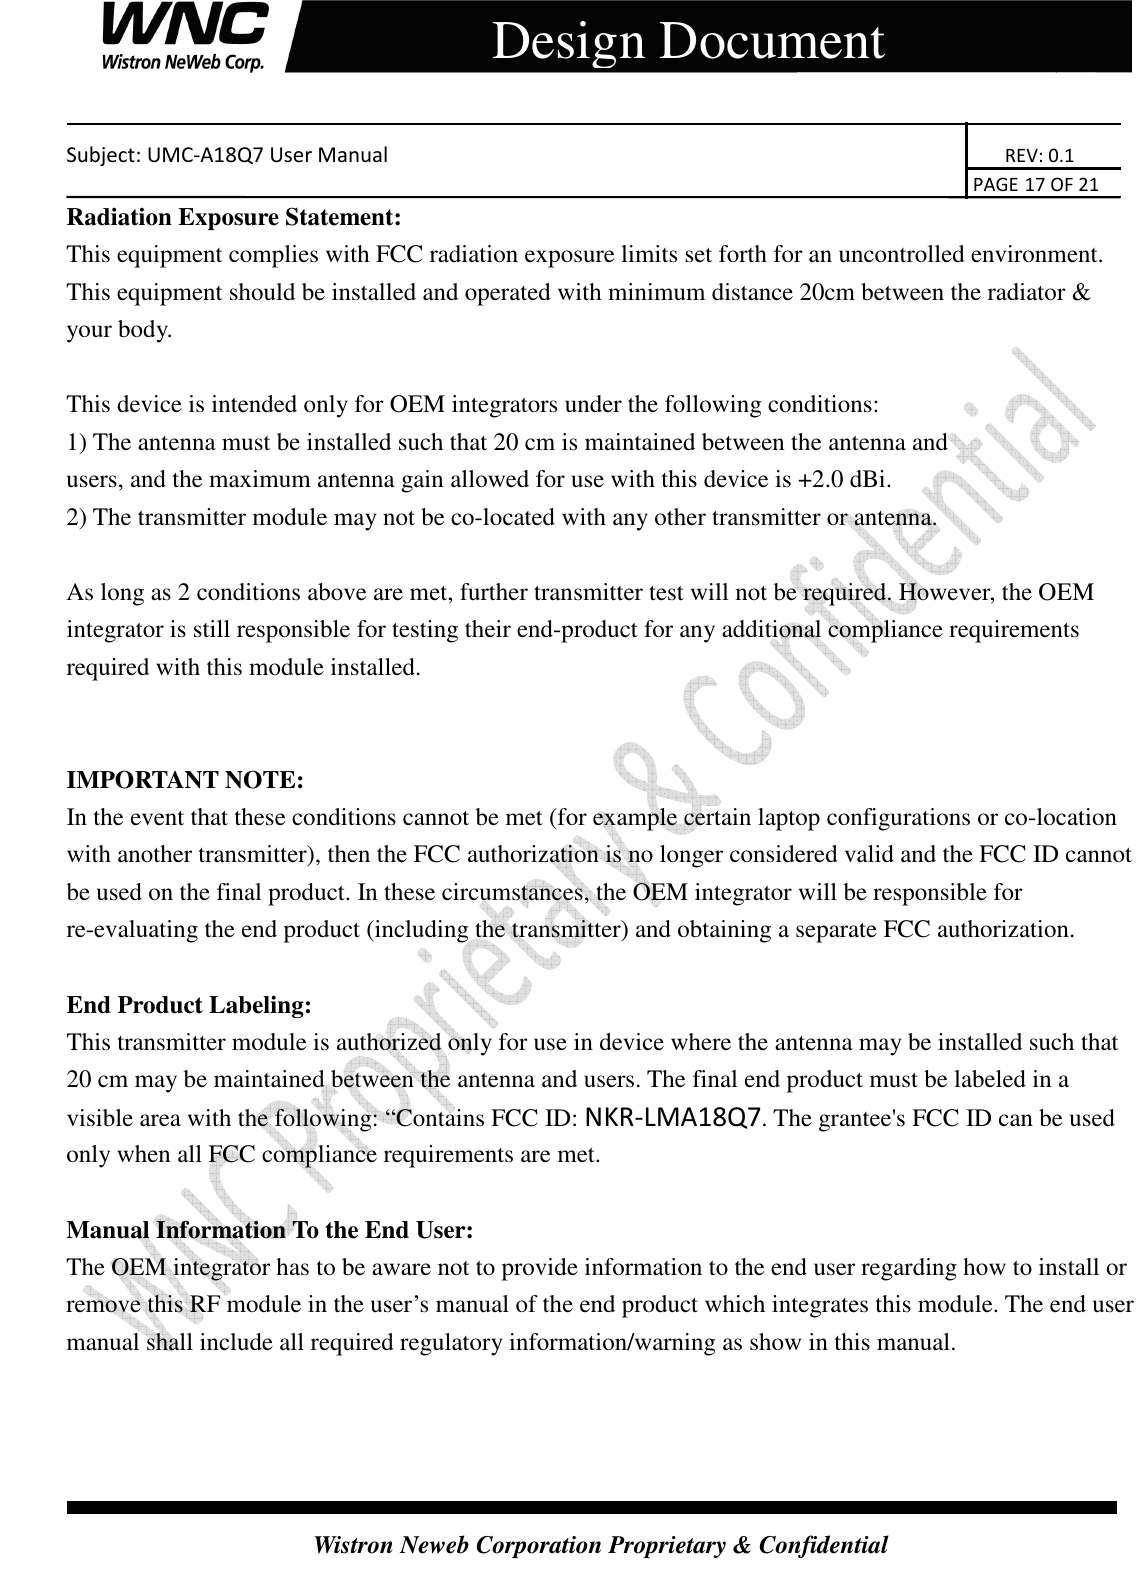    Subject: UMC-A18Q7 User Manual                                                                       REV: 0.1                                                                                                                                                                               PAGE 17 OF 21  Wistron Neweb Corporation Proprietary &amp; Confidential     Design Document Radiation Exposure Statement: This equipment complies with FCC radiation exposure limits set forth for an uncontrolled environment. This equipment should be installed and operated with minimum distance 20cm between the radiator &amp; your body.  This device is intended only for OEM integrators under the following conditions: 1) The antenna must be installed such that 20 cm is maintained between the antenna and     users, and the maximum antenna gain allowed for use with this device is +2.0 dBi.   2) The transmitter module may not be co-located with any other transmitter or antenna.  As long as 2 conditions above are met, further transmitter test will not be required. However, the OEM integrator is still responsible for testing their end-product for any additional compliance requirements required with this module installed.   IMPORTANT NOTE:   In the event that these conditions cannot be met (for example certain laptop configurations or co-location with another transmitter), then the FCC authorization is no longer considered valid and the FCC ID cannot be used on the final product. In these circumstances, the OEM integrator will be responsible for re-evaluating the end product (including the transmitter) and obtaining a separate FCC authorization.  End Product Labeling: This transmitter module is authorized only for use in device where the antenna may be installed such that 20 cm may be maintained between the antenna and users. The final end product must be labeled in a visible area with the following: “Contains FCC ID: NKR-LMA18Q7. The grantee&apos;s FCC ID can be used only when all FCC compliance requirements are met.  Manual Information To the End User: The OEM integrator has to be aware not to provide information to the end user regarding how to install or remove this RF module in the user’s manual of the end product which integrates this module. The end user manual shall include all required regulatory information/warning as show in this manual. 